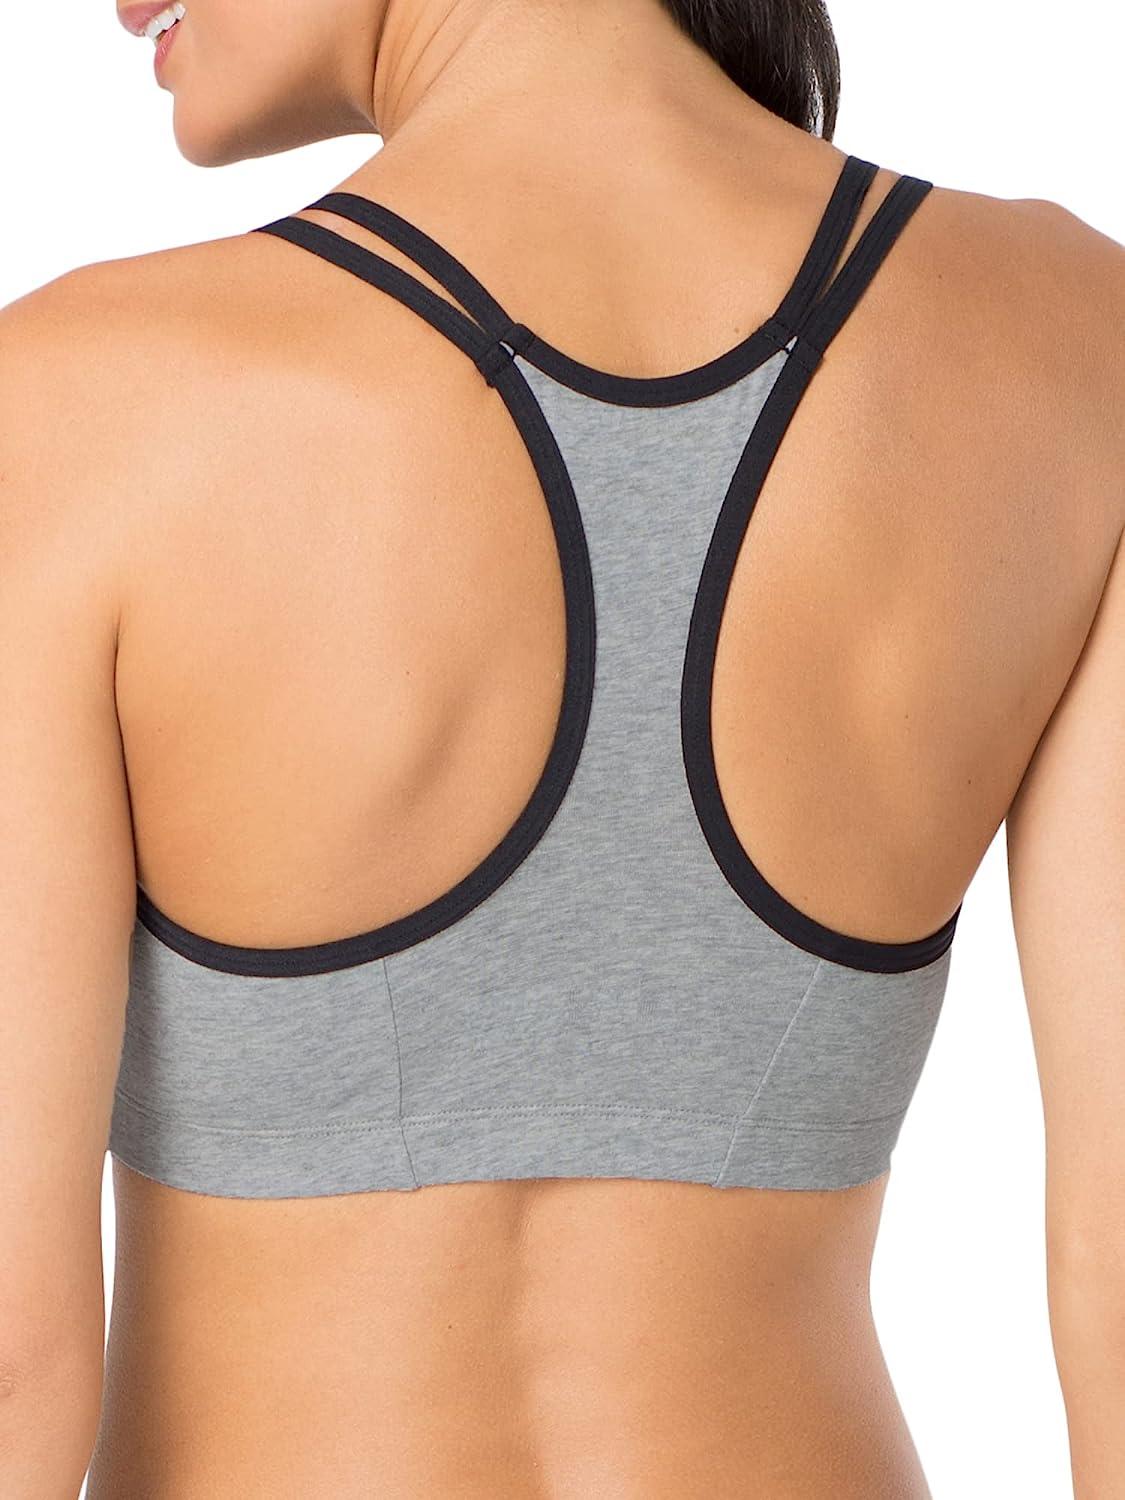 Fruit Of The Loom Women's Tank Style Cotton Sports Bra 3-pack Rose